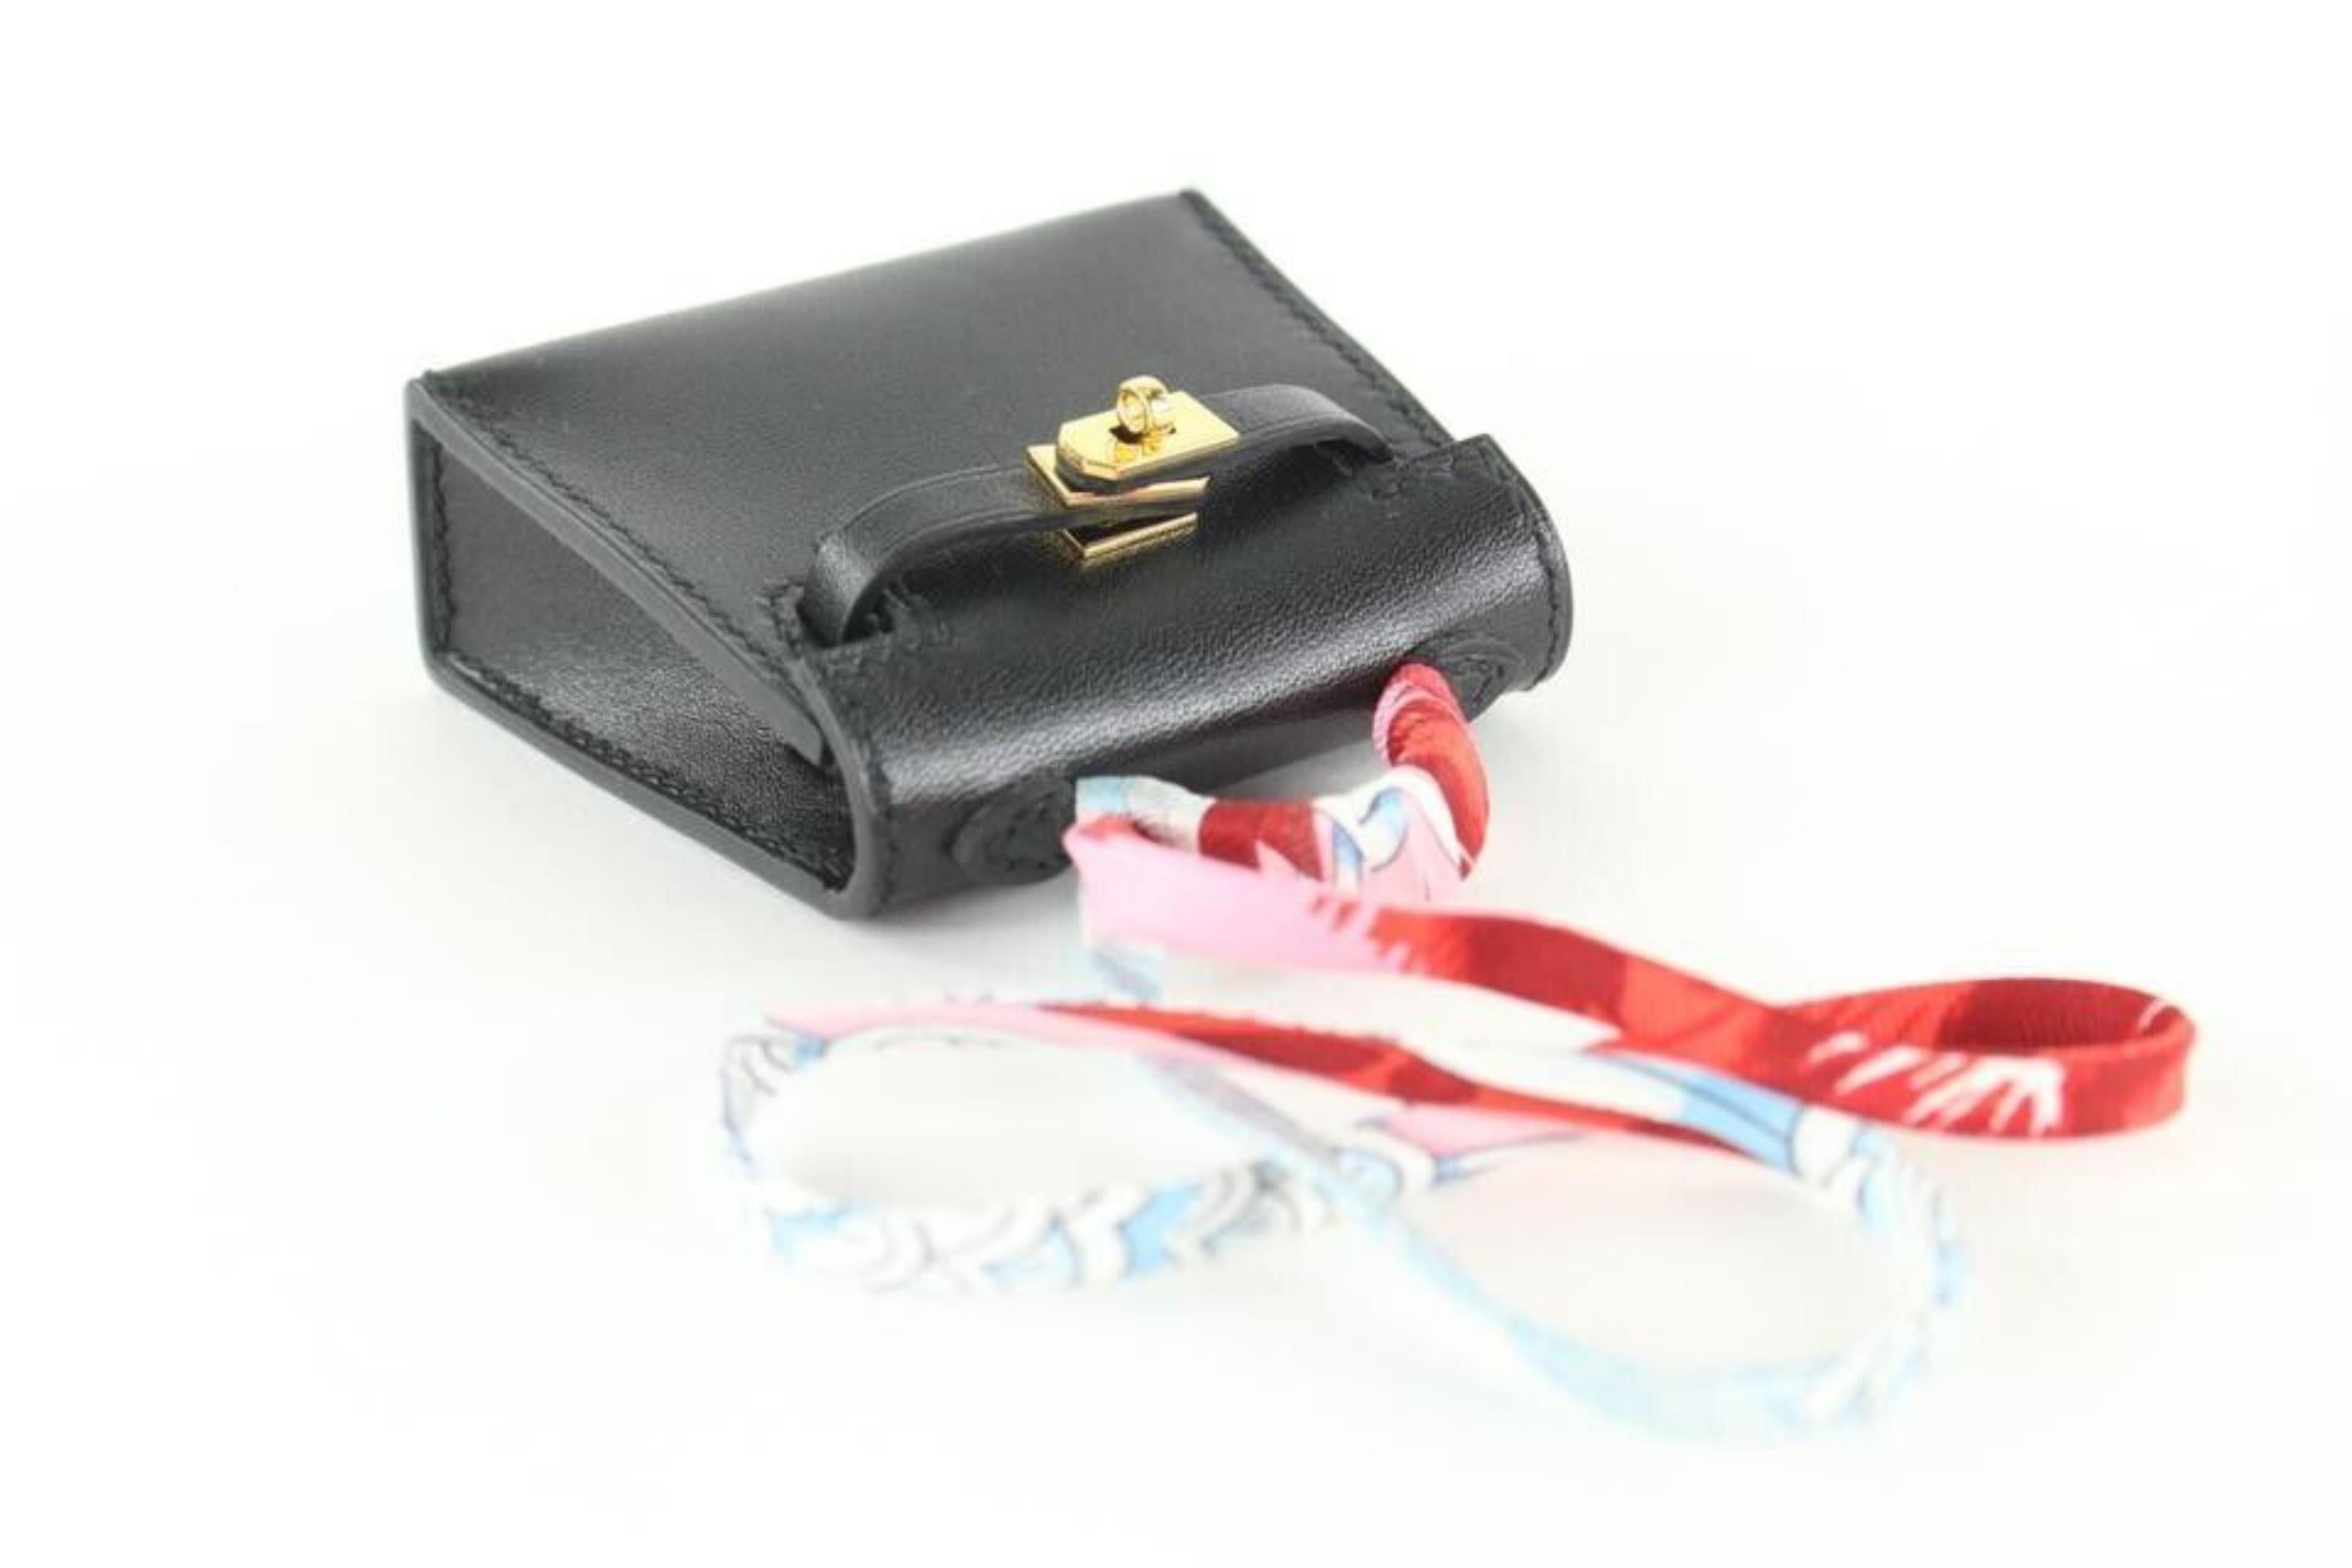 Hermès Black Tadelkat Micro Mini Kelly Twilly Bag Charm 2H414 In New Condition For Sale In Dix hills, NY